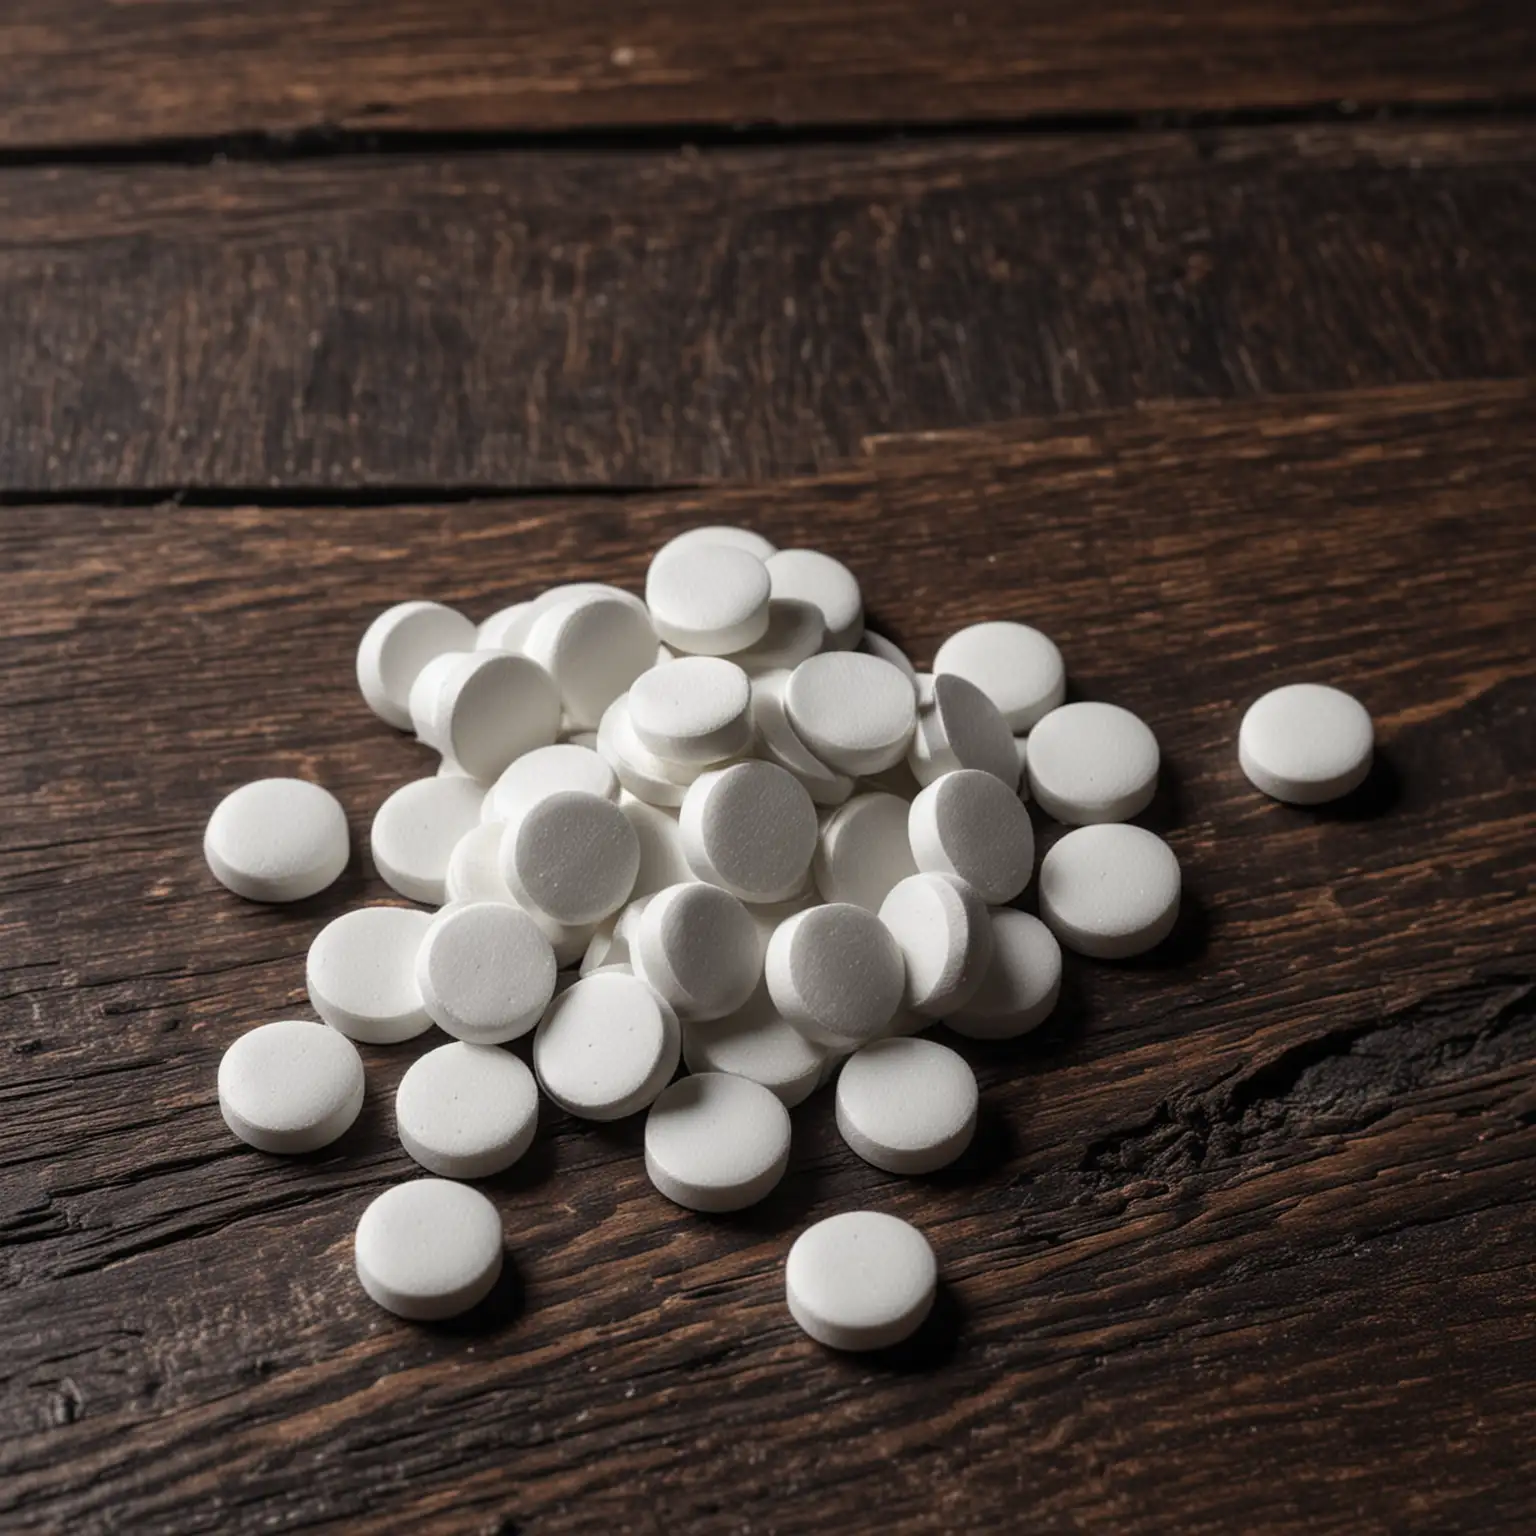 CloseUp of White Supplement Tablets on Dark Wooden Table